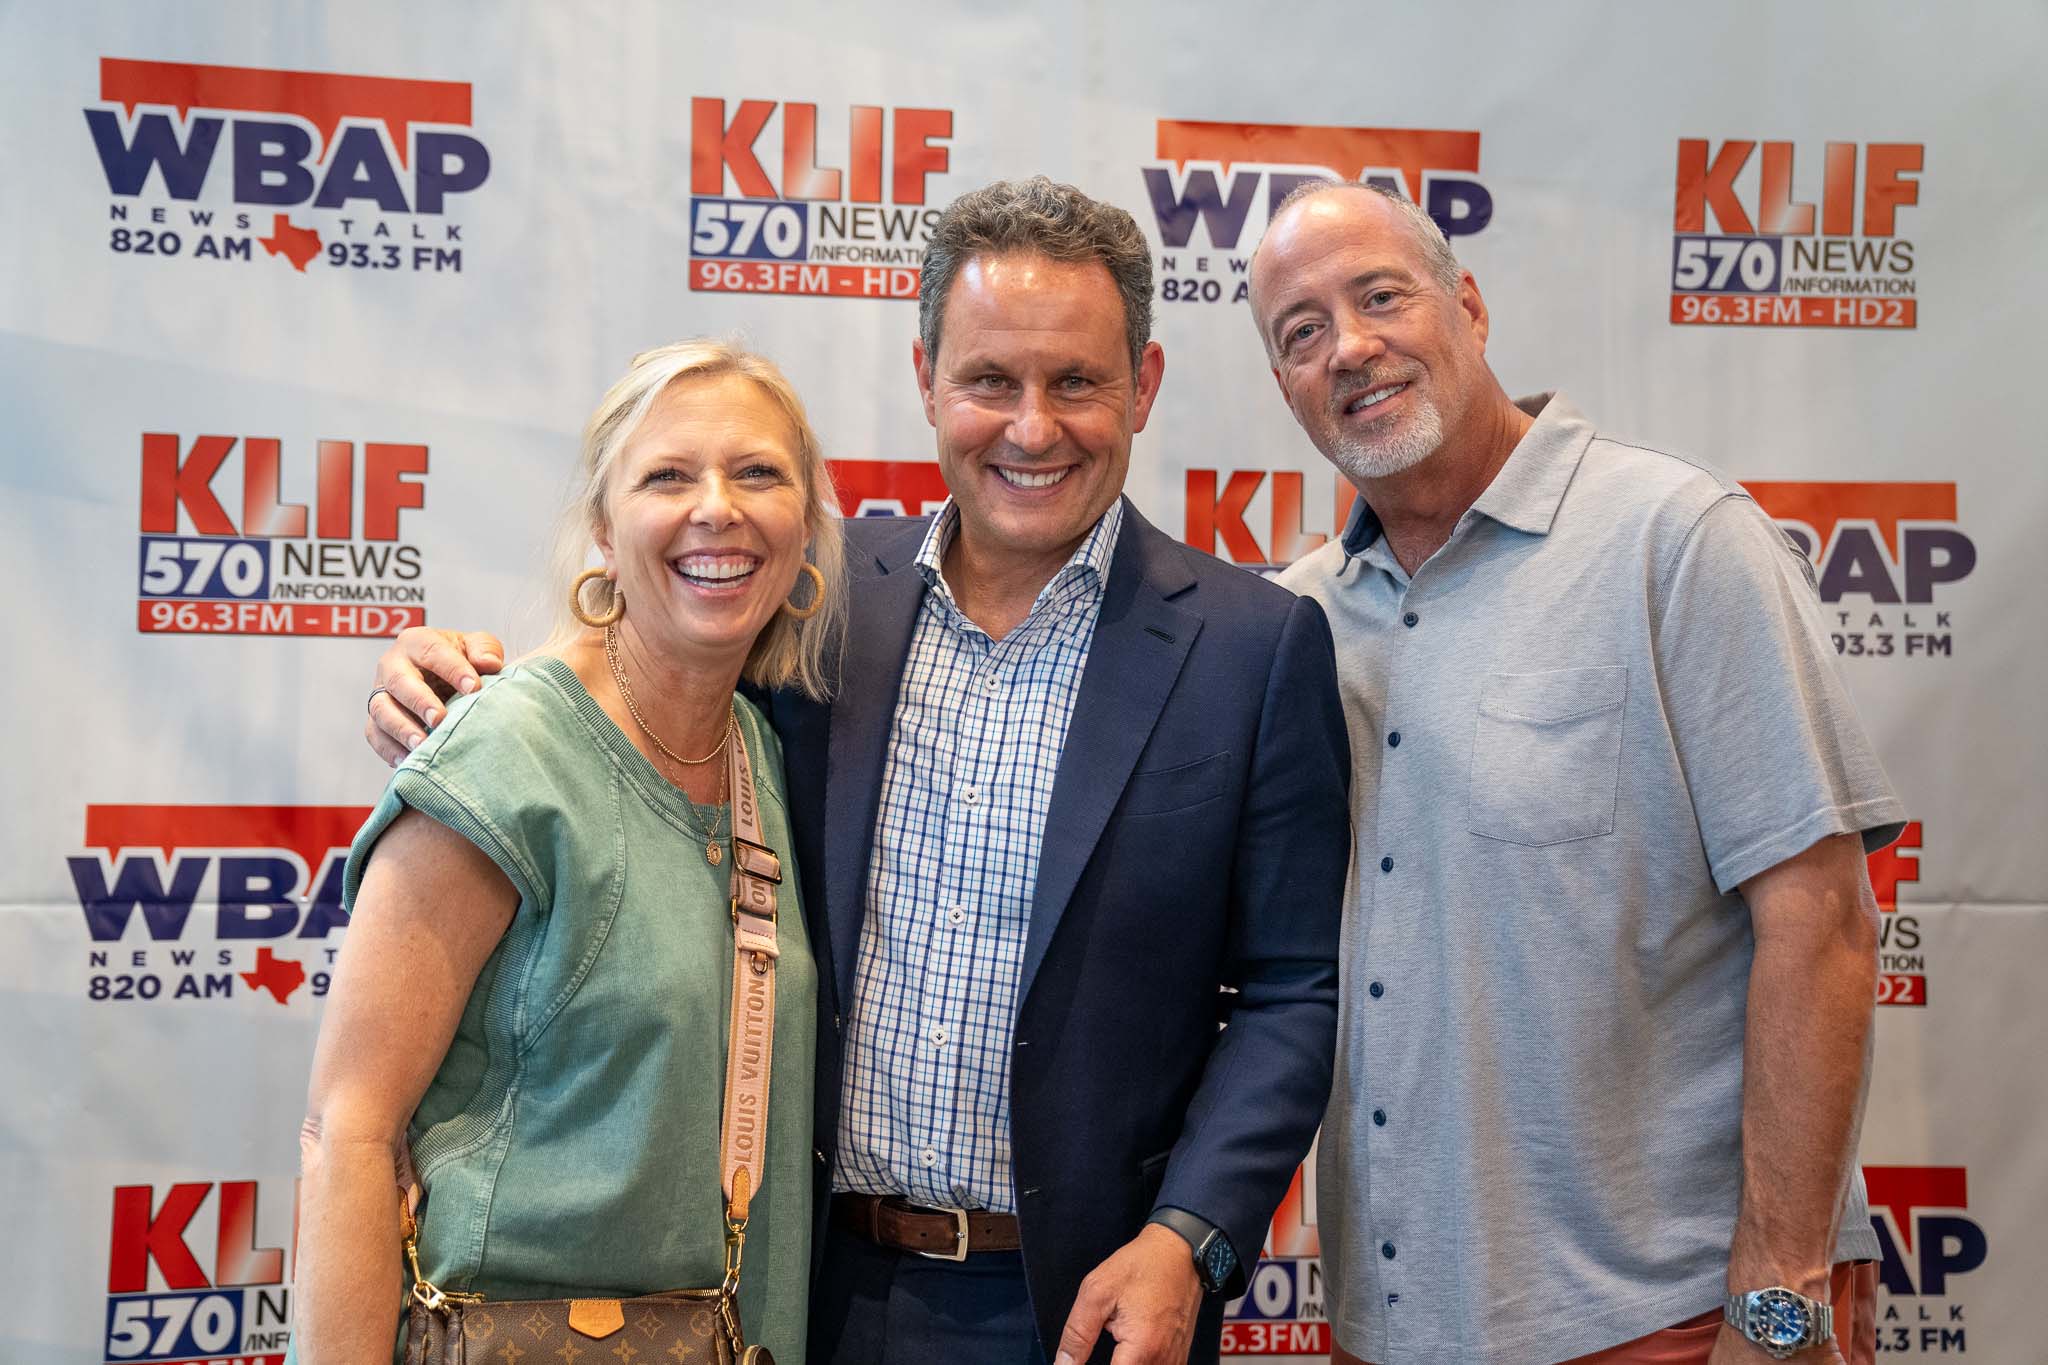 Brian Kilmeade Thrills WBAP/KLIF with an Exciting Experience Plus a Meet and Greet: See the Night’s Best Photos Here!